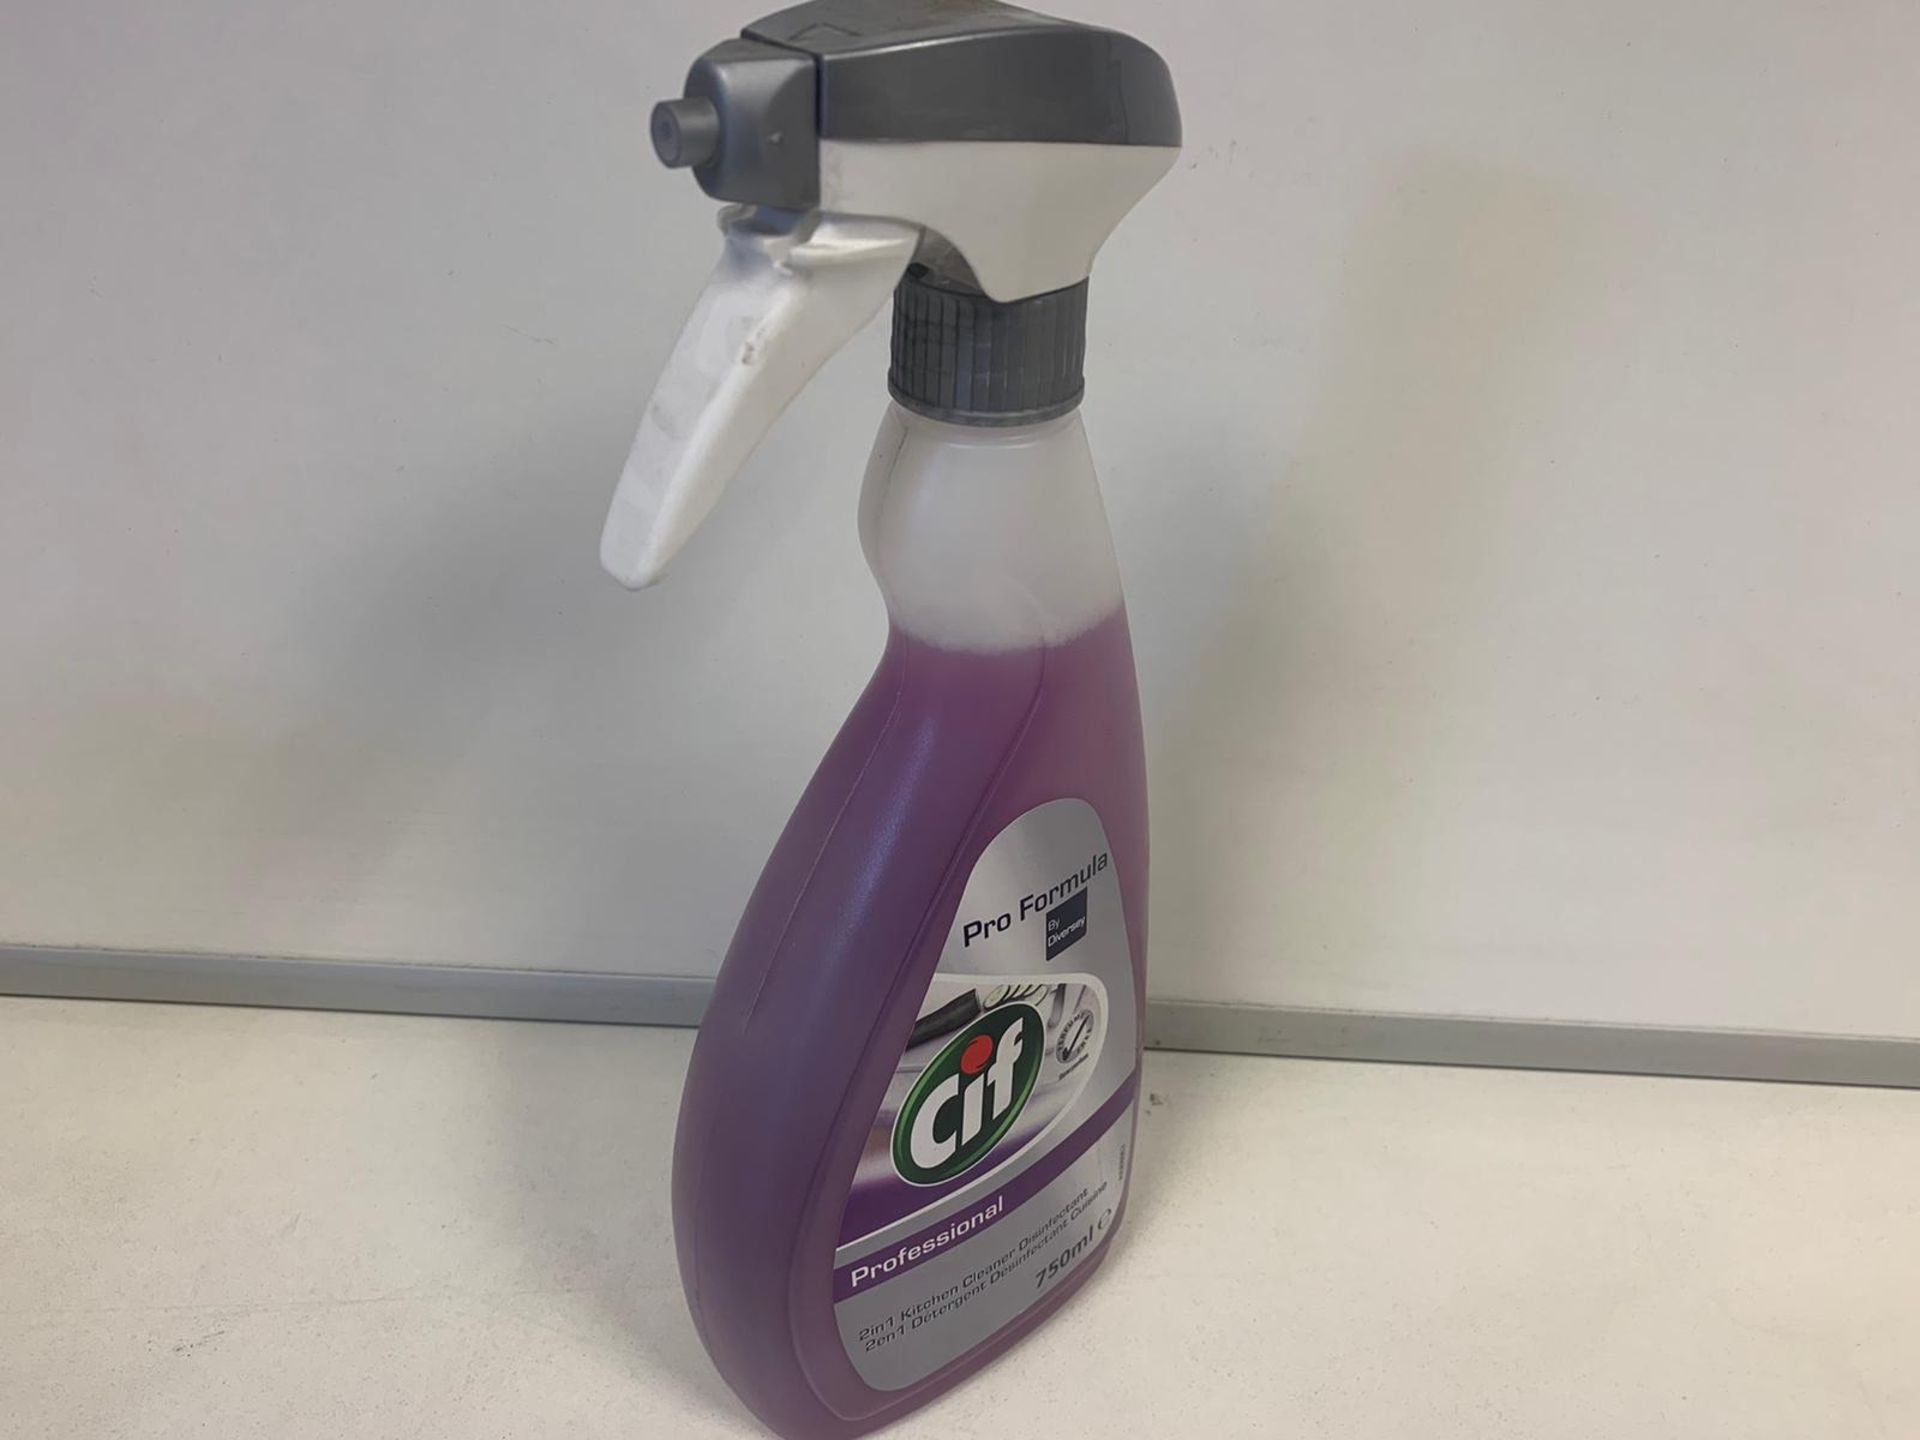 60 x NEW CIF PRO FORMULA PROFESSIONAL 2 IN 1 KITCHEN CLEANER DISENFECTANT